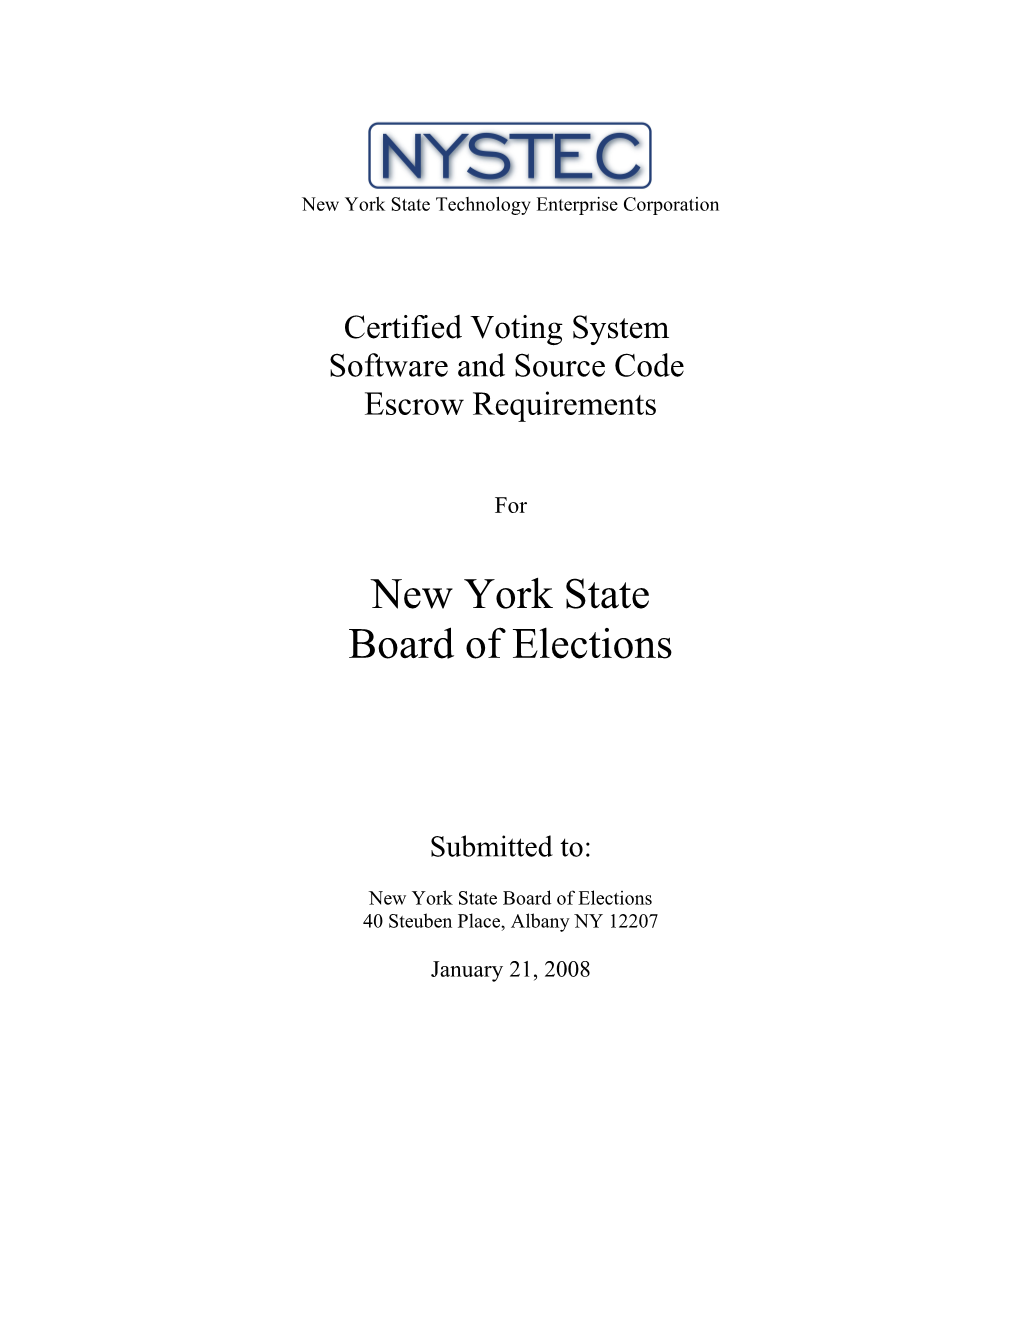 NYSBOE Certified Voting Systems Escrow Requirements